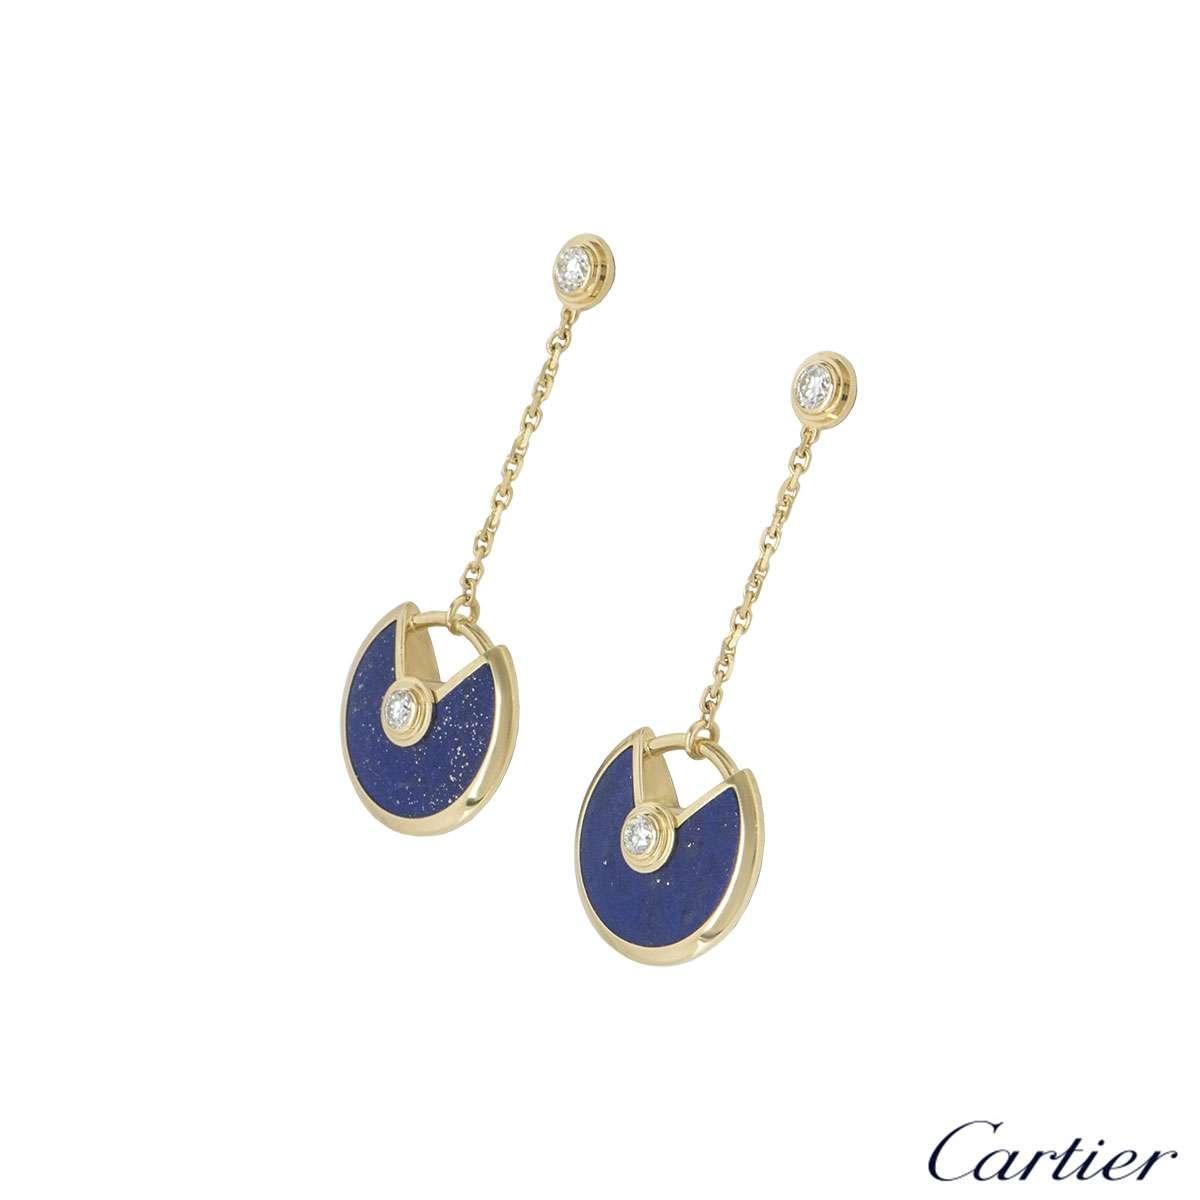 A pair of 18k yellow gold earrings by Cartier from the Amulette de Cartier collection. The earrings are composed of a single round brilliant cut diamond, suspending a lapis lazuli disk, with another round brilliant cut diamond in the centre. The